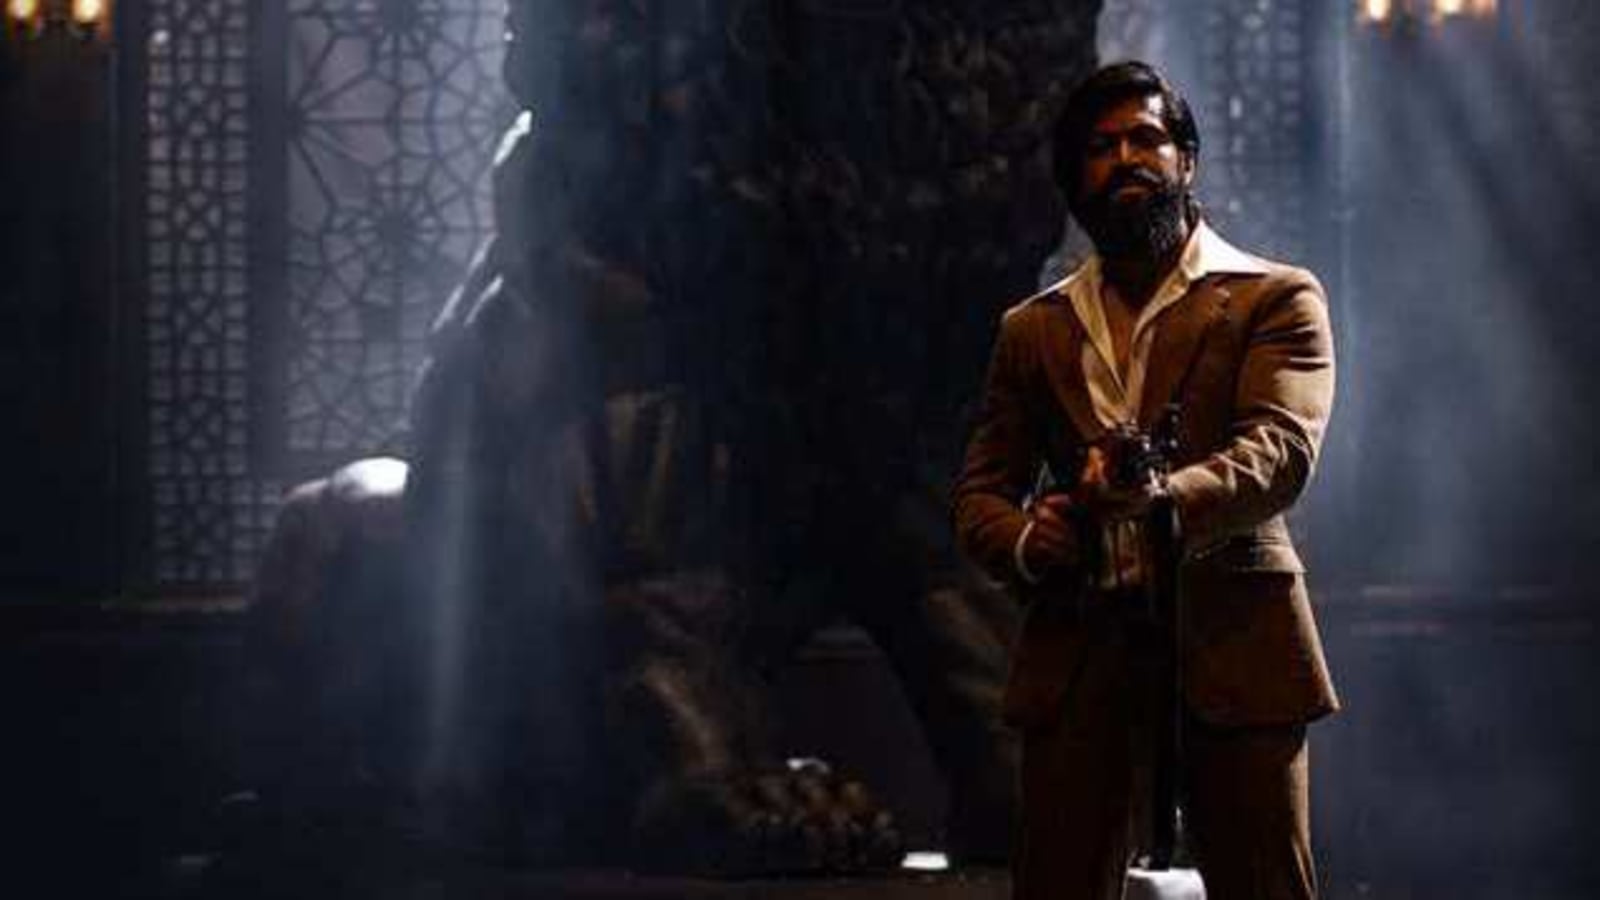 Kgf Chapter 2 To Release In Theatres On July 16 Yash Goes All Guns Blazing In New Poster